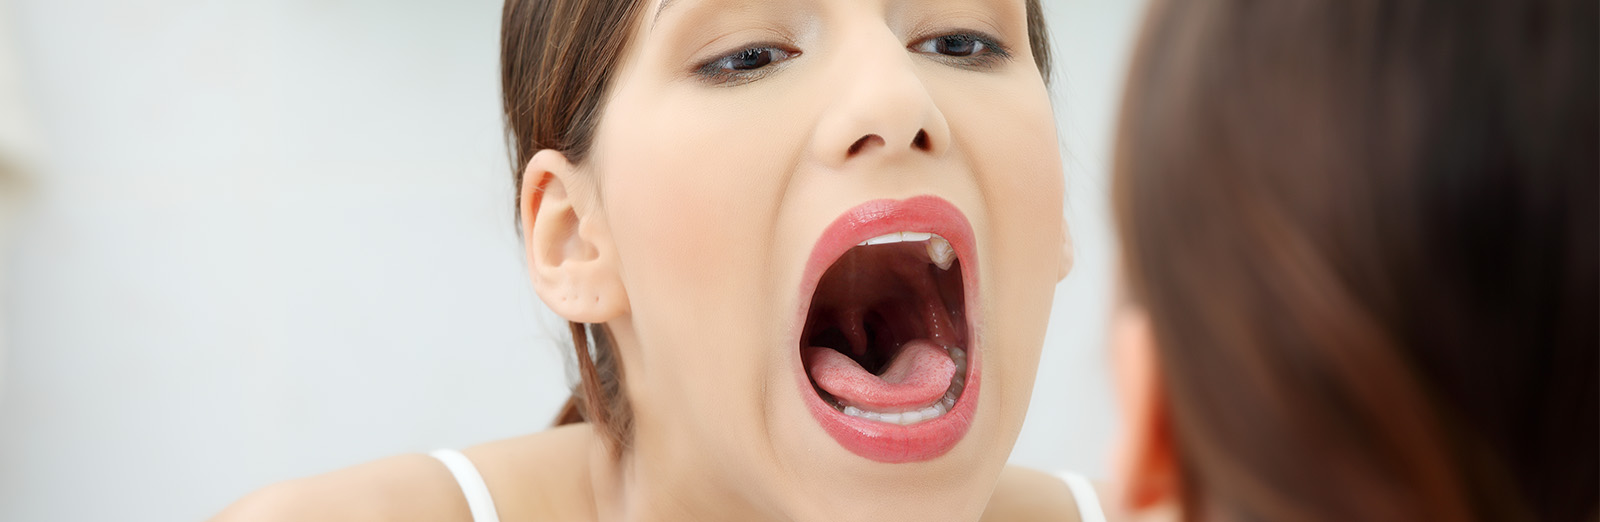 November_every part of your mouth plays a part in oral health - hero image.jpg